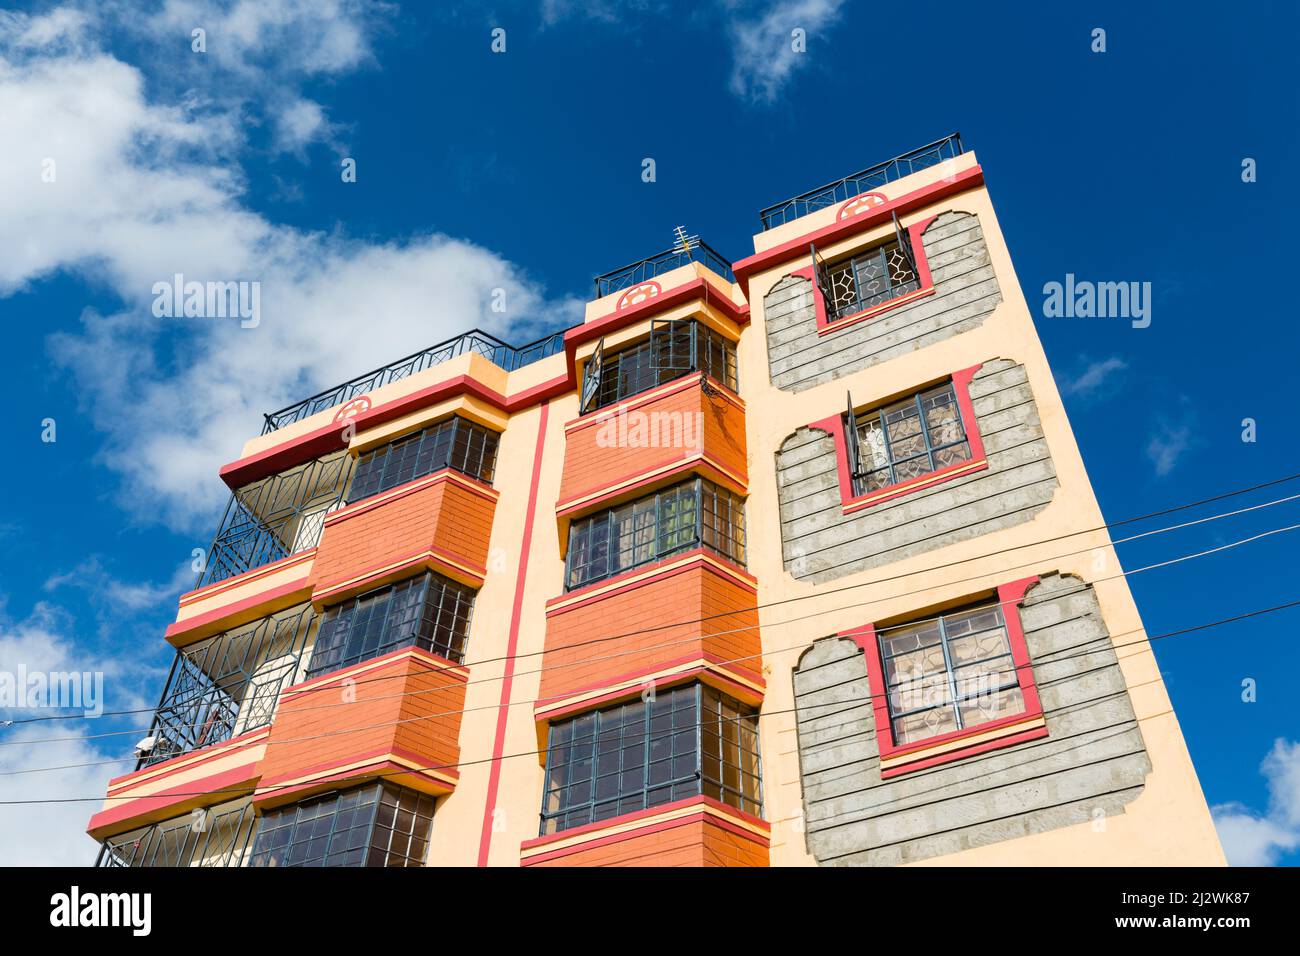 Typical colorful African appartment building in Tassia, a residential district in the east of Nairobi, Kenya. Stock Photo